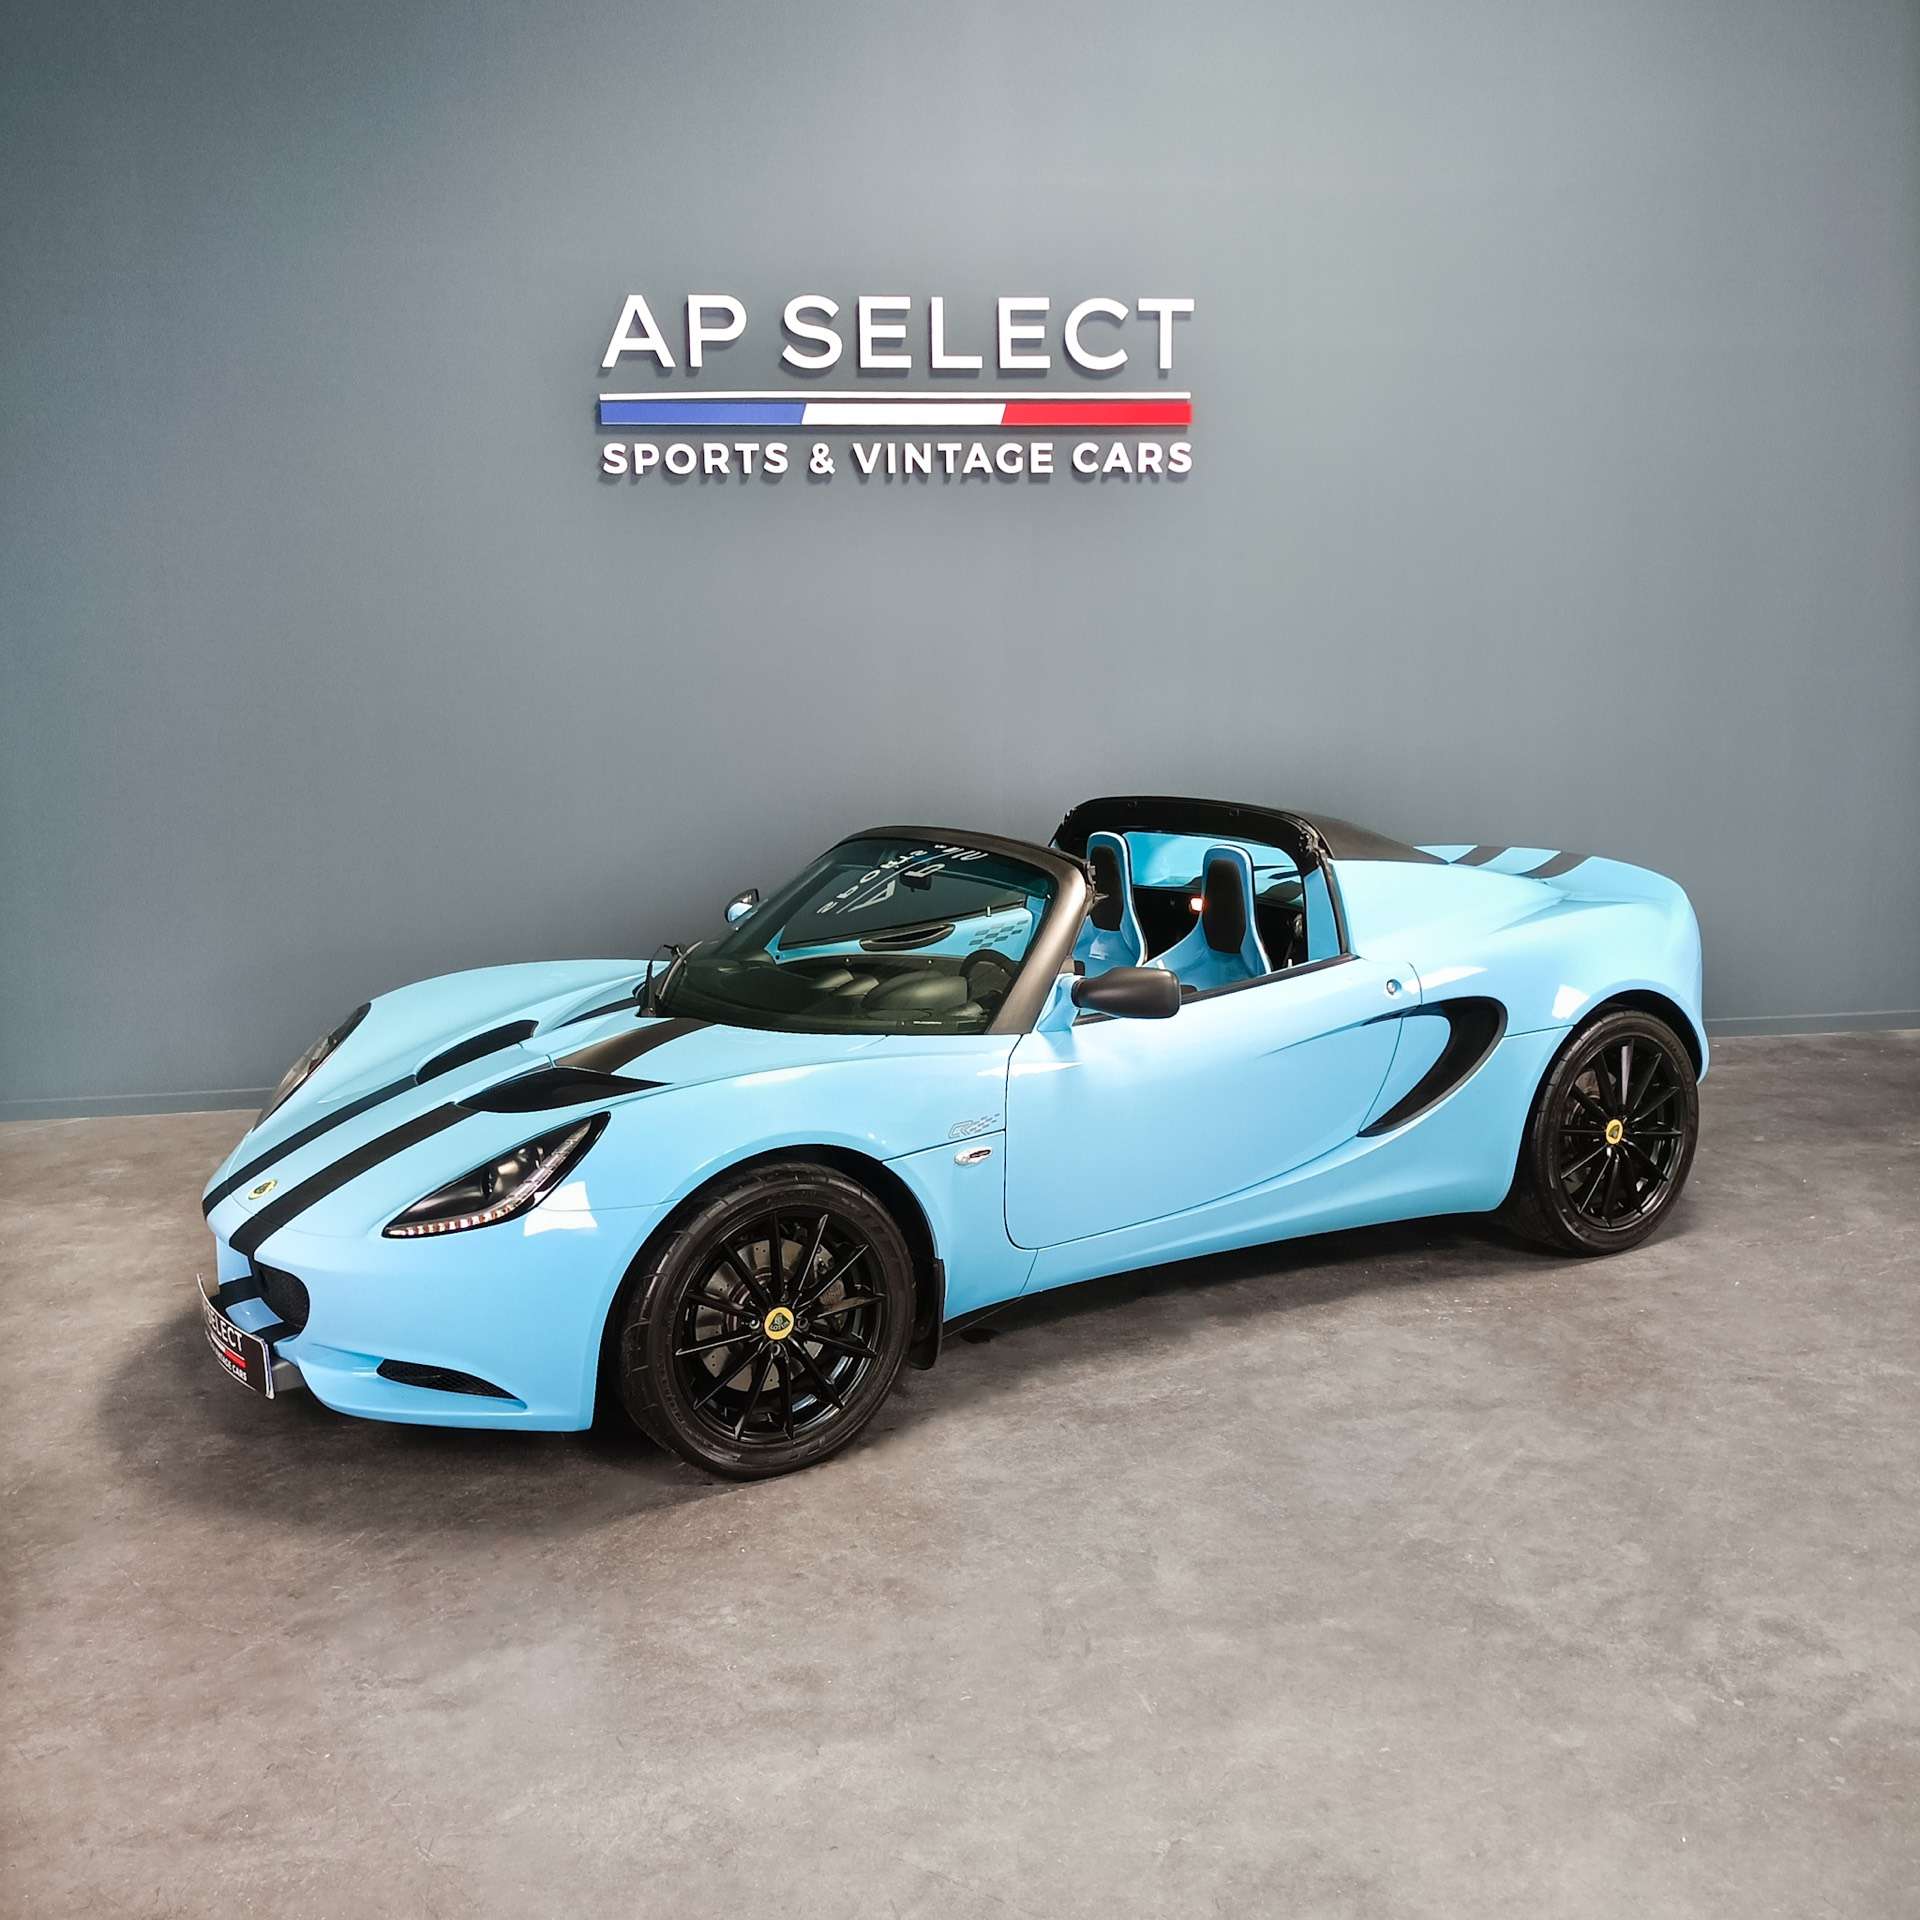 Lotus Elise Convertible in Blue used in Lyon for € 44,990.-